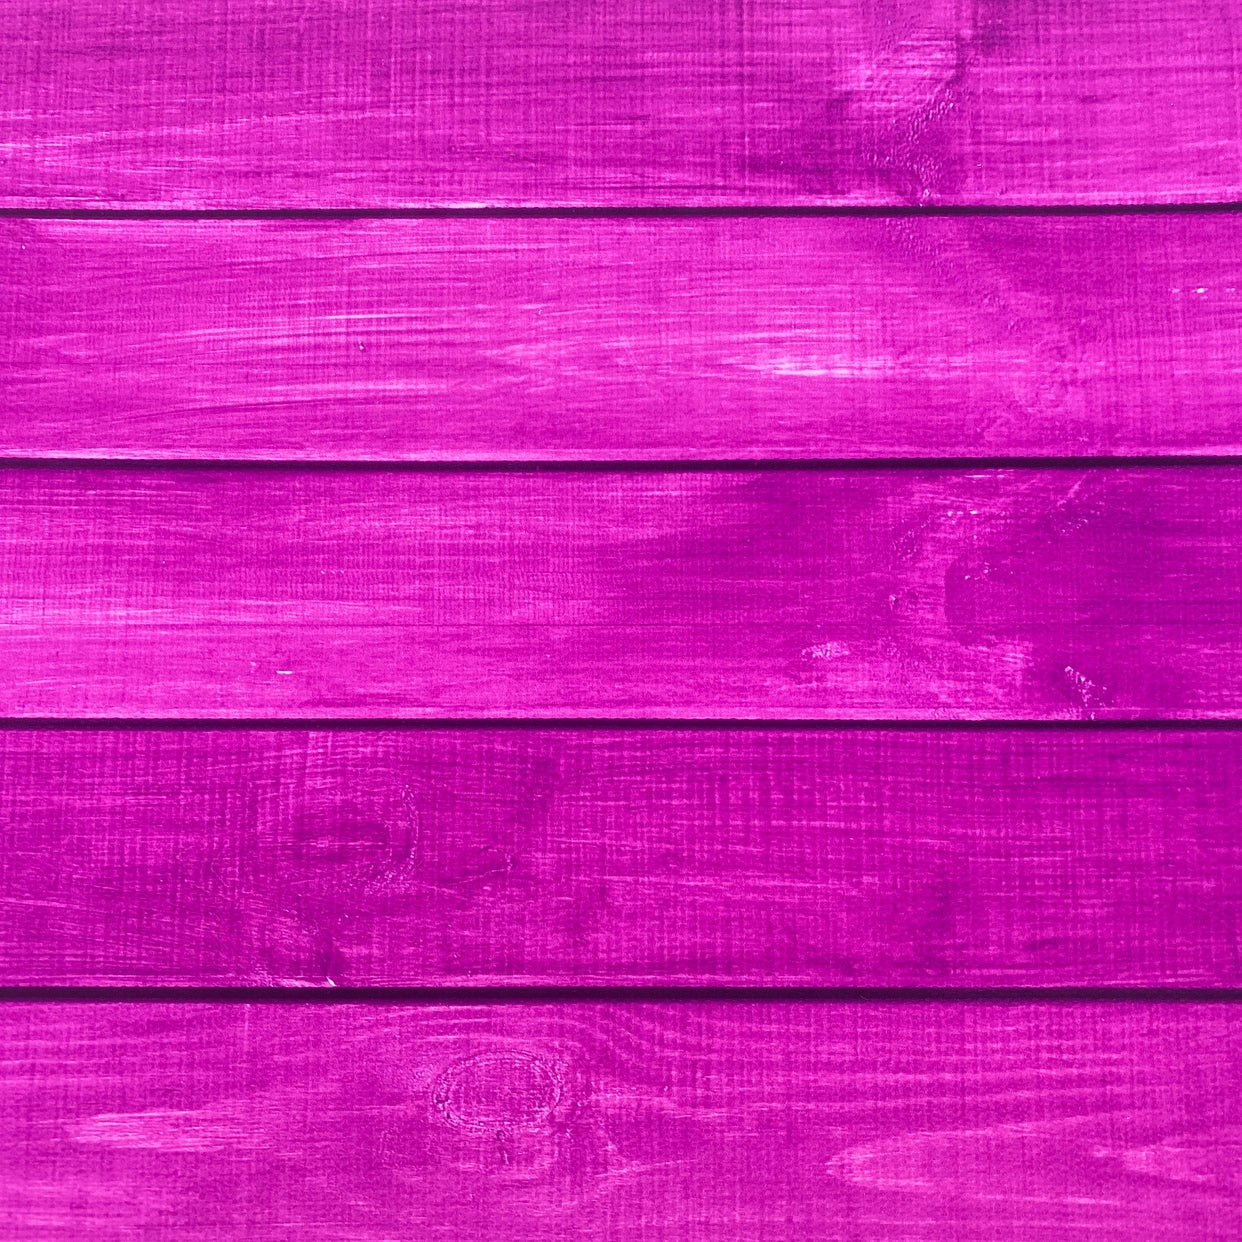 Vivid Pink Wood Canvas Photography Background